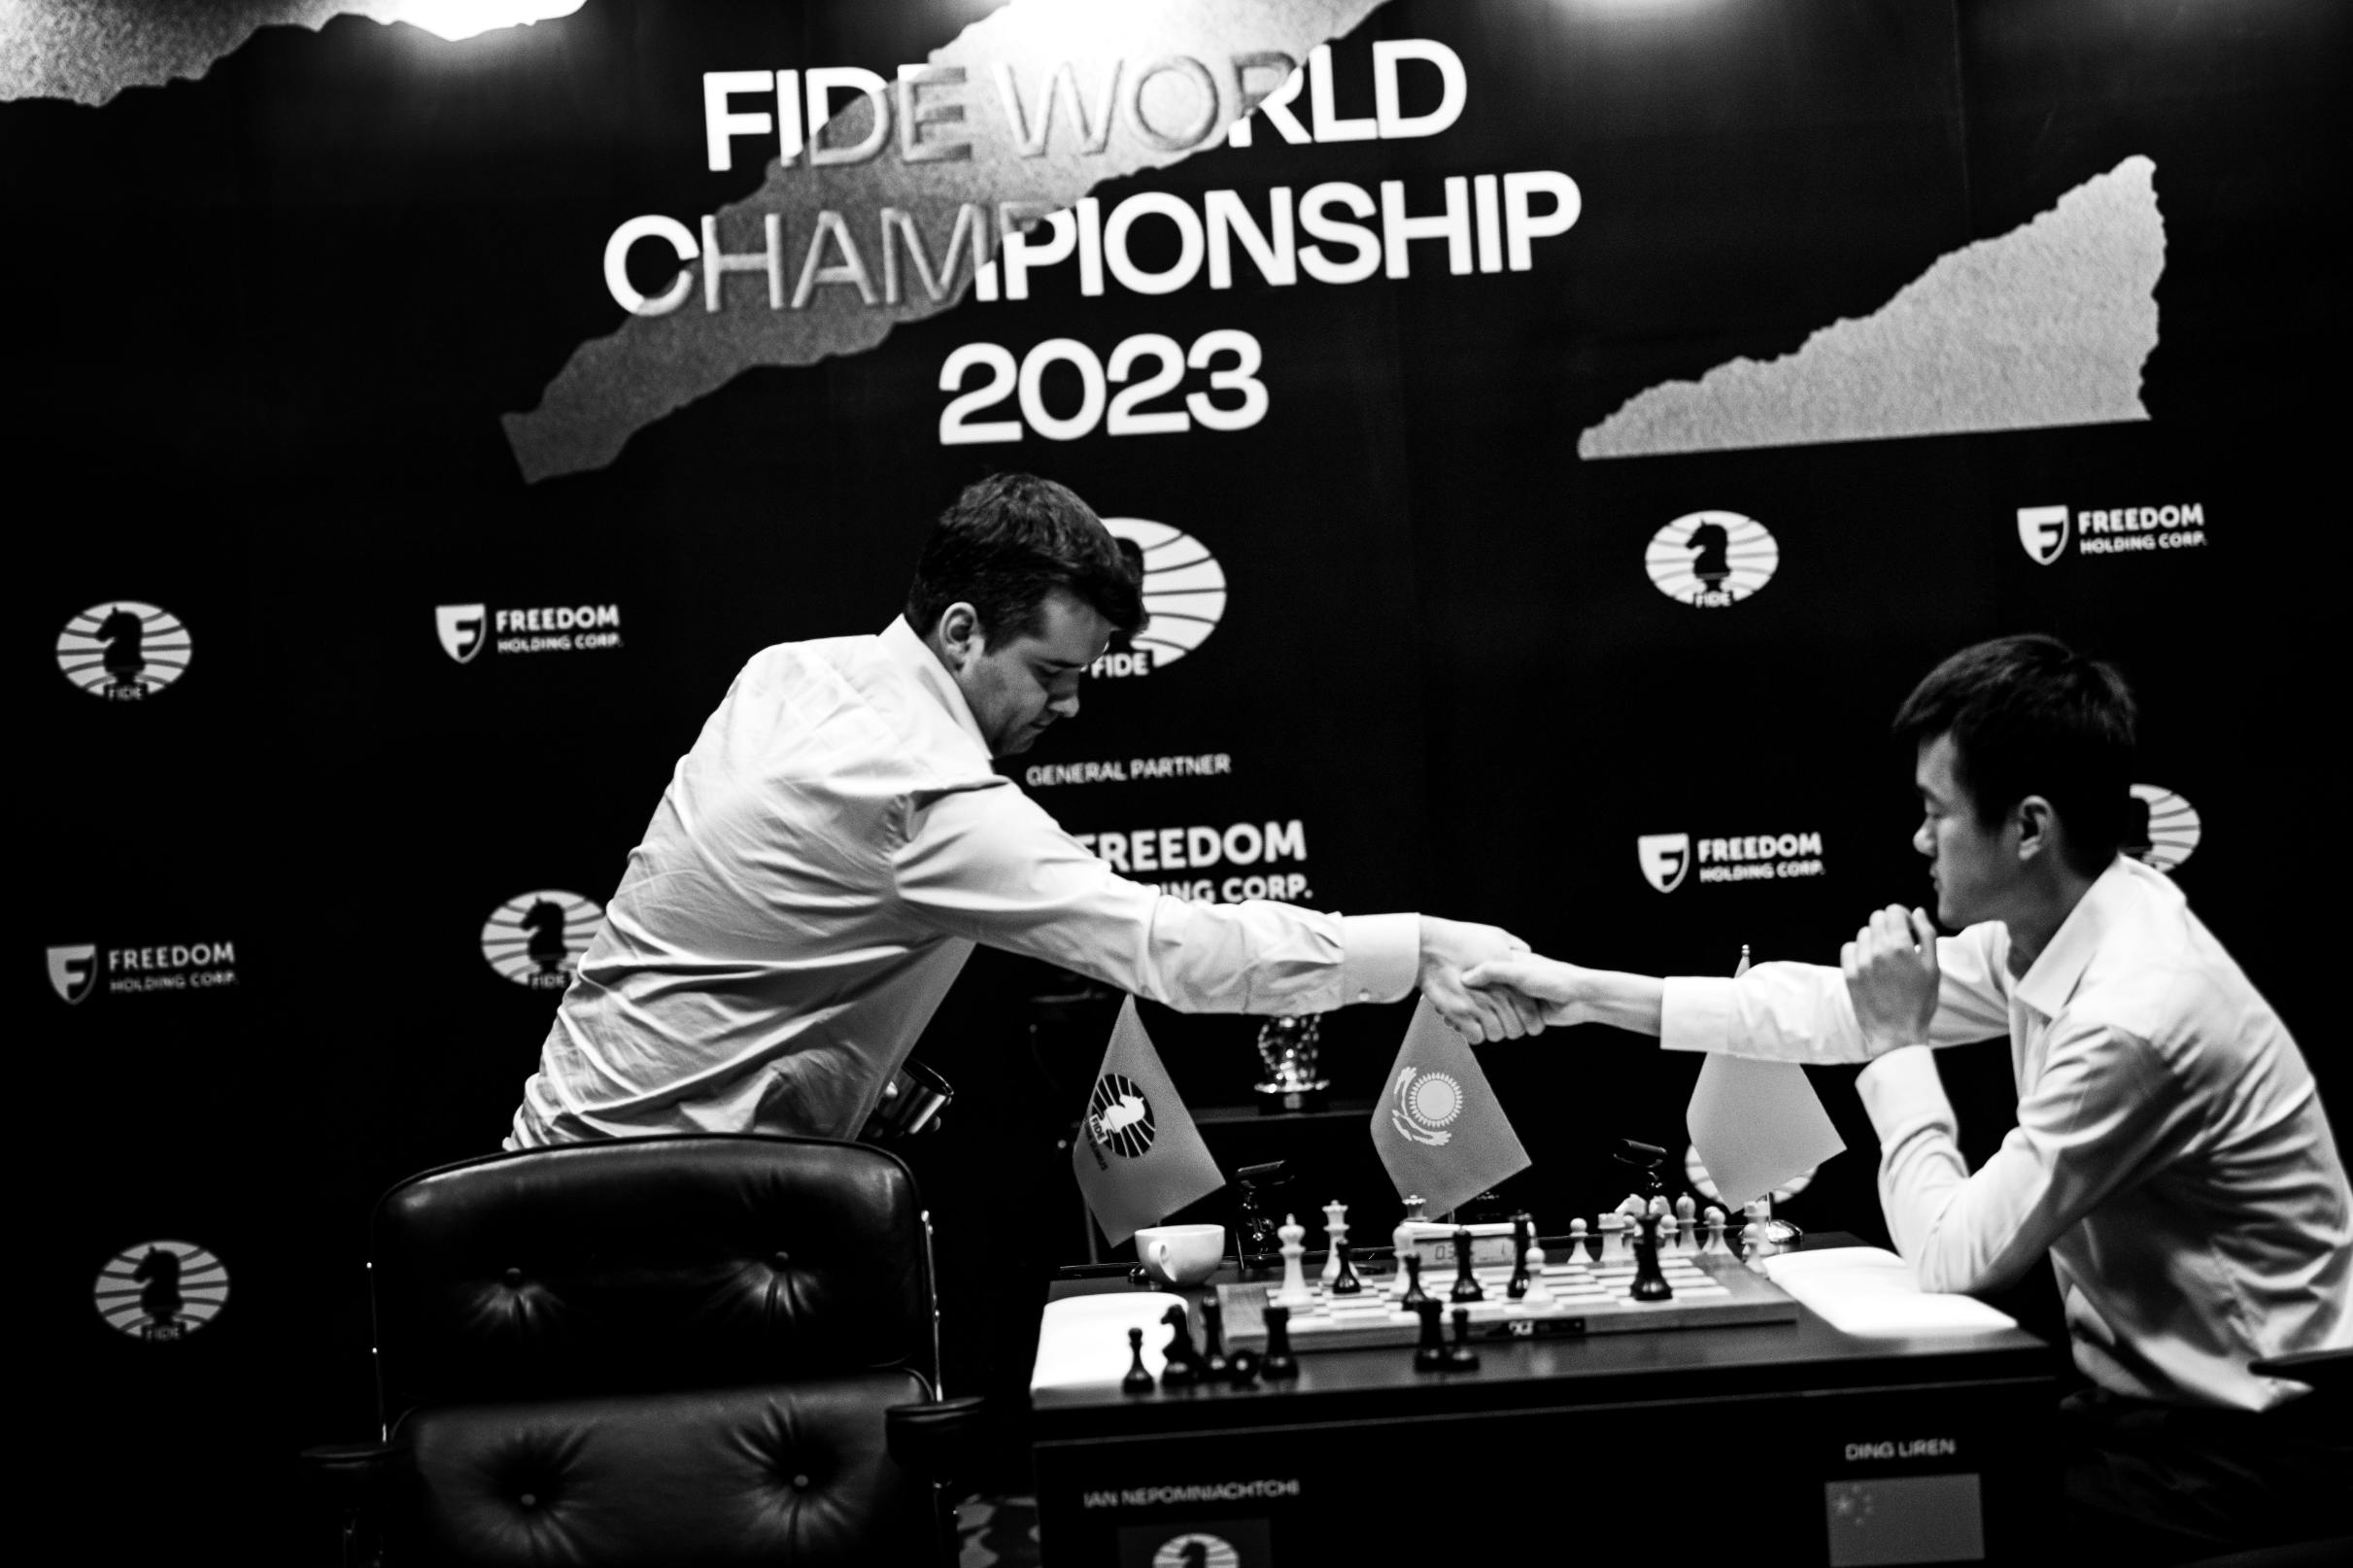 Ding embraced by his second Richard Rapport after his first ever world  championship victory : r/chess